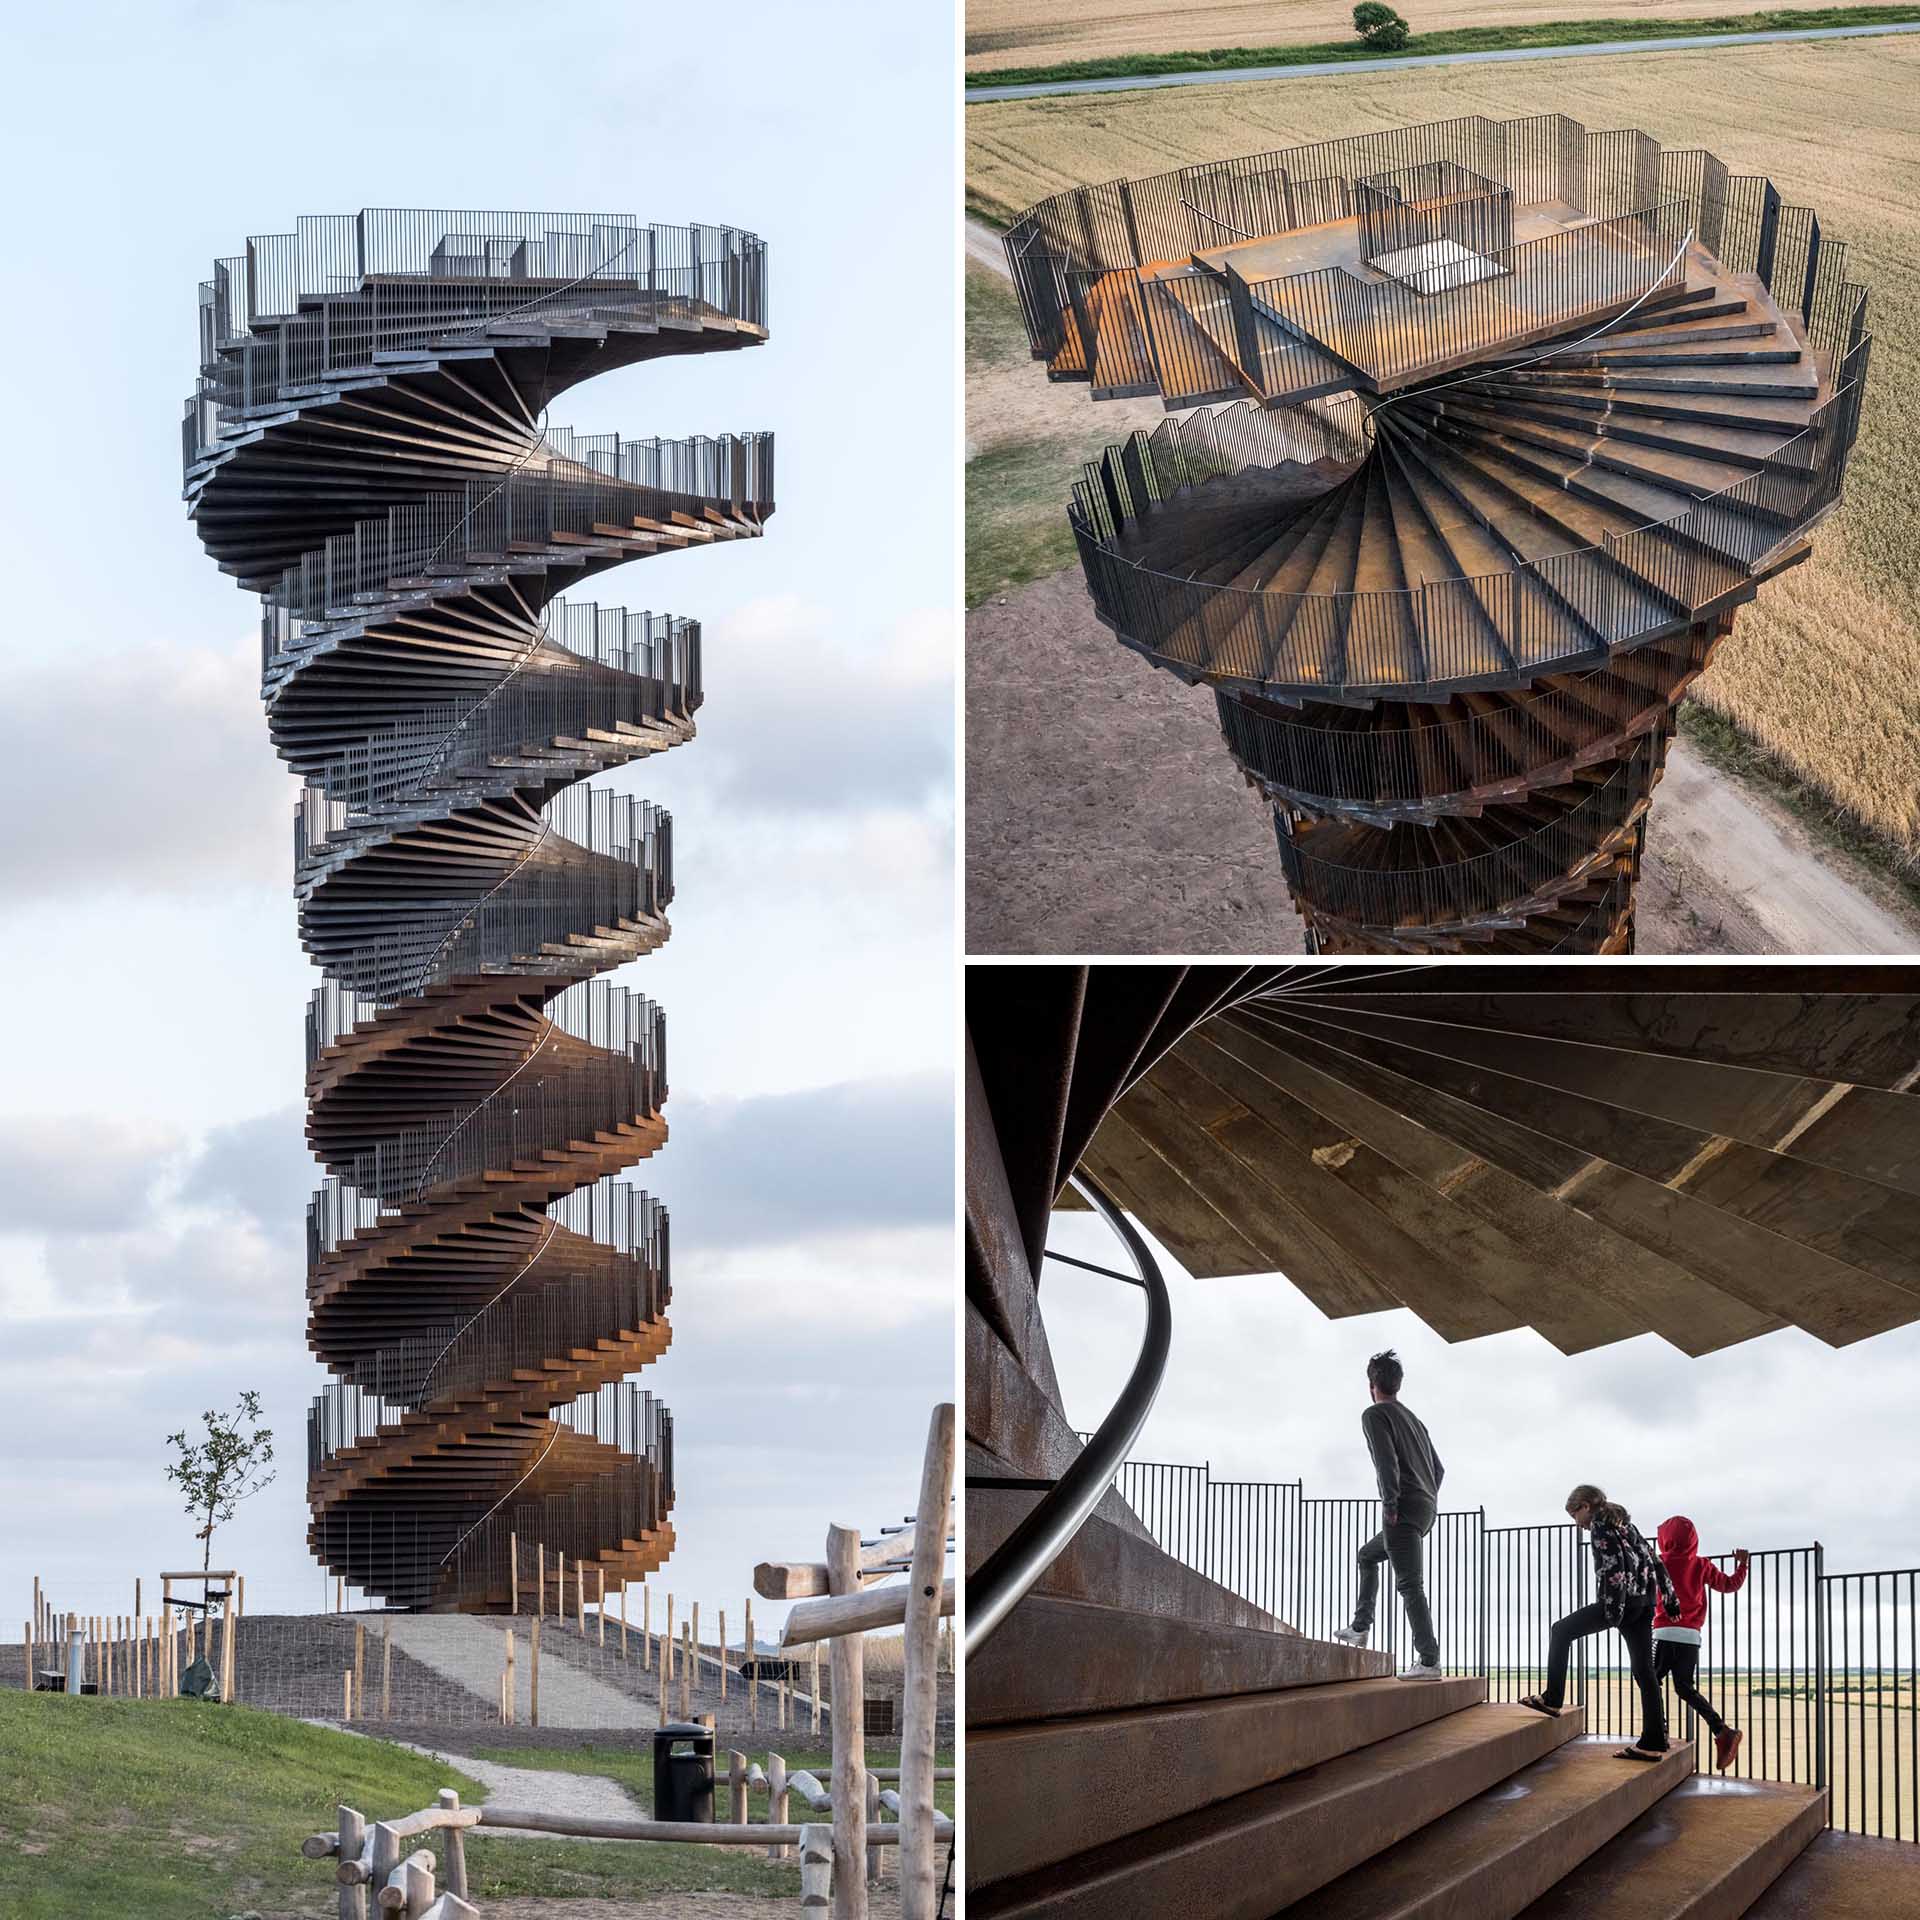 New photos show BIG's twisting Marsk Tower in Denmark